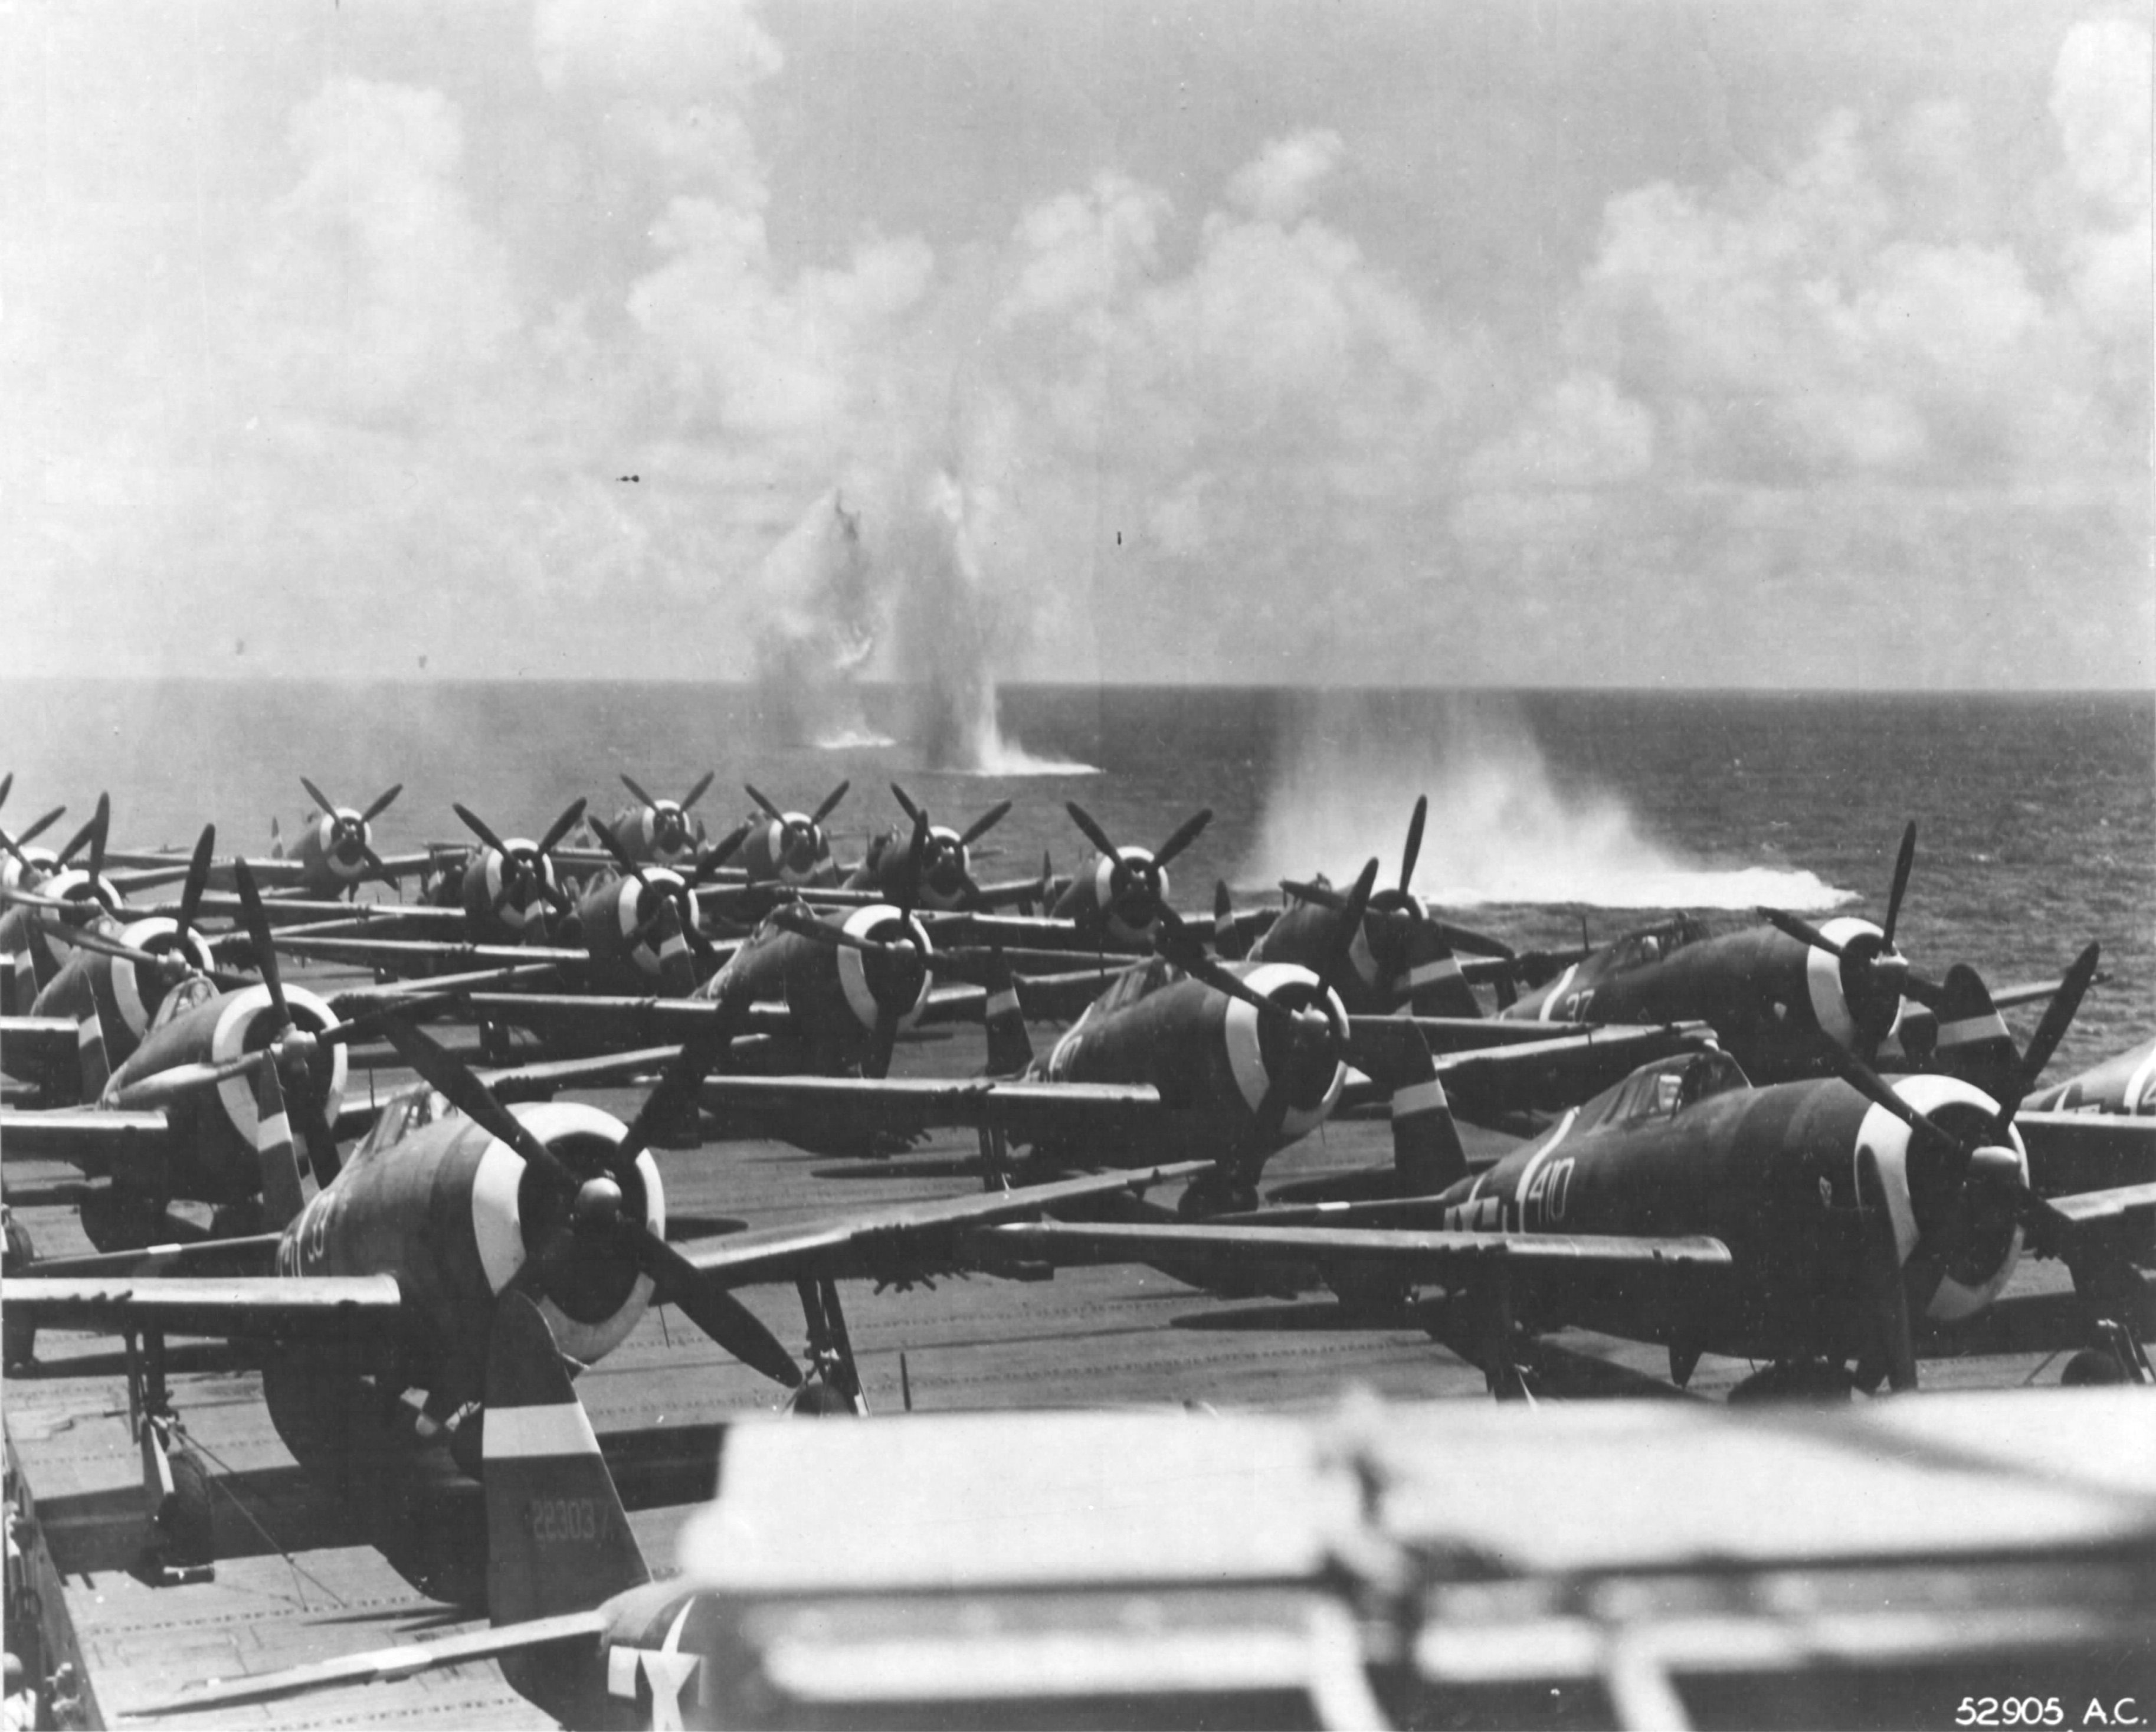 P-47Ds 73rd FS 318th FG 7th AF being ferried to Saipan on USS Manila Bay CVE-61. Attacked during refueling operations east of Saipan (appx 15.00, 147.00) by four Aichi Val dive bombers.